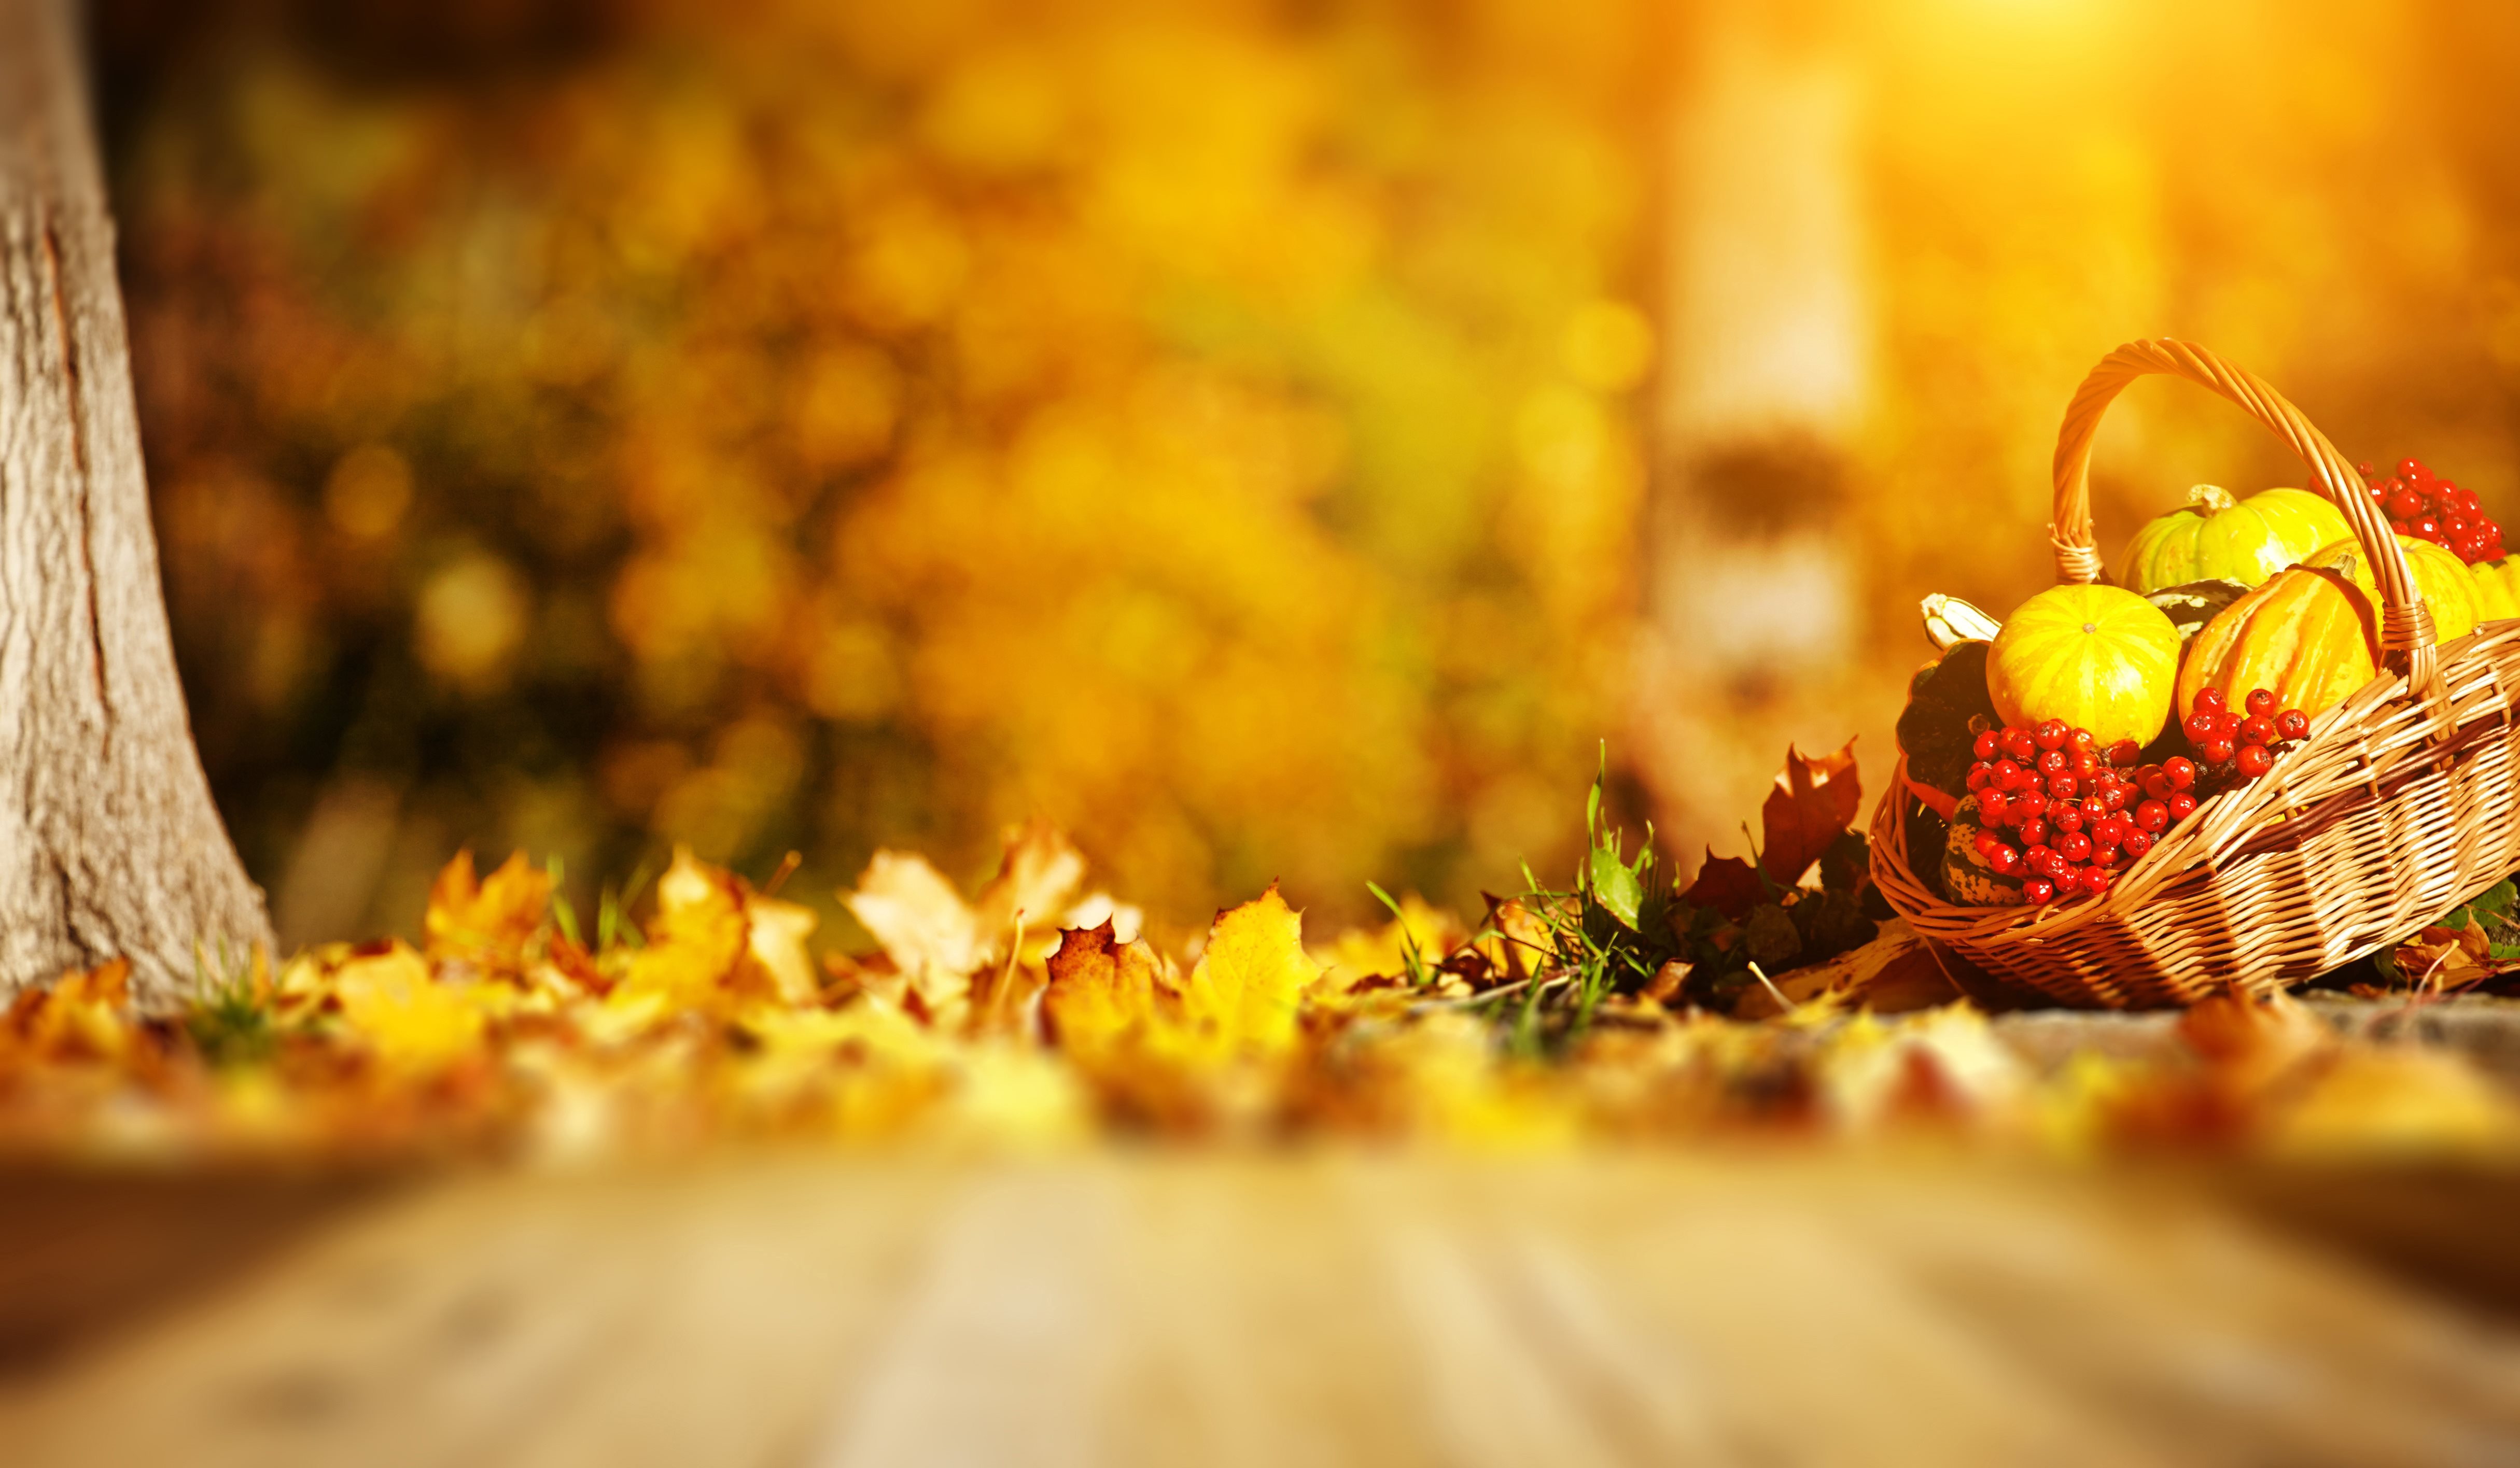 Download wallpaper paul, board, the barrel, basket, tree, vegetables, leaves, fruits, autumn, pumpkin, nature, berries, rowan for desktop with resolution 4860x2832. High Quality HD picture wallpaper